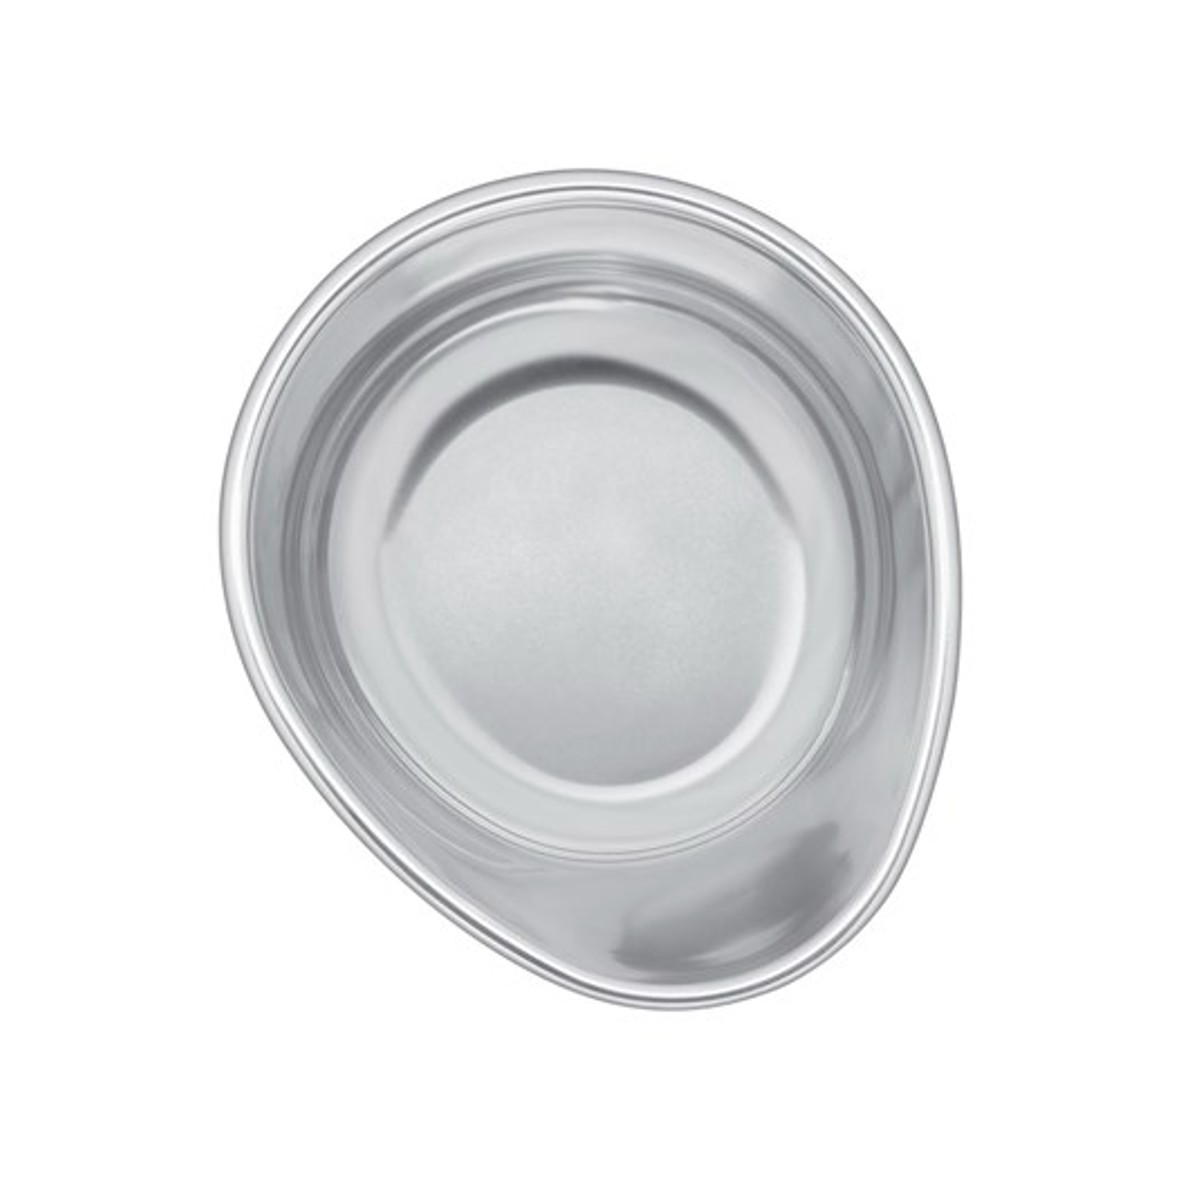 WeatherTech Replacement Dog Bowls for Feeding System - Stainless Steel